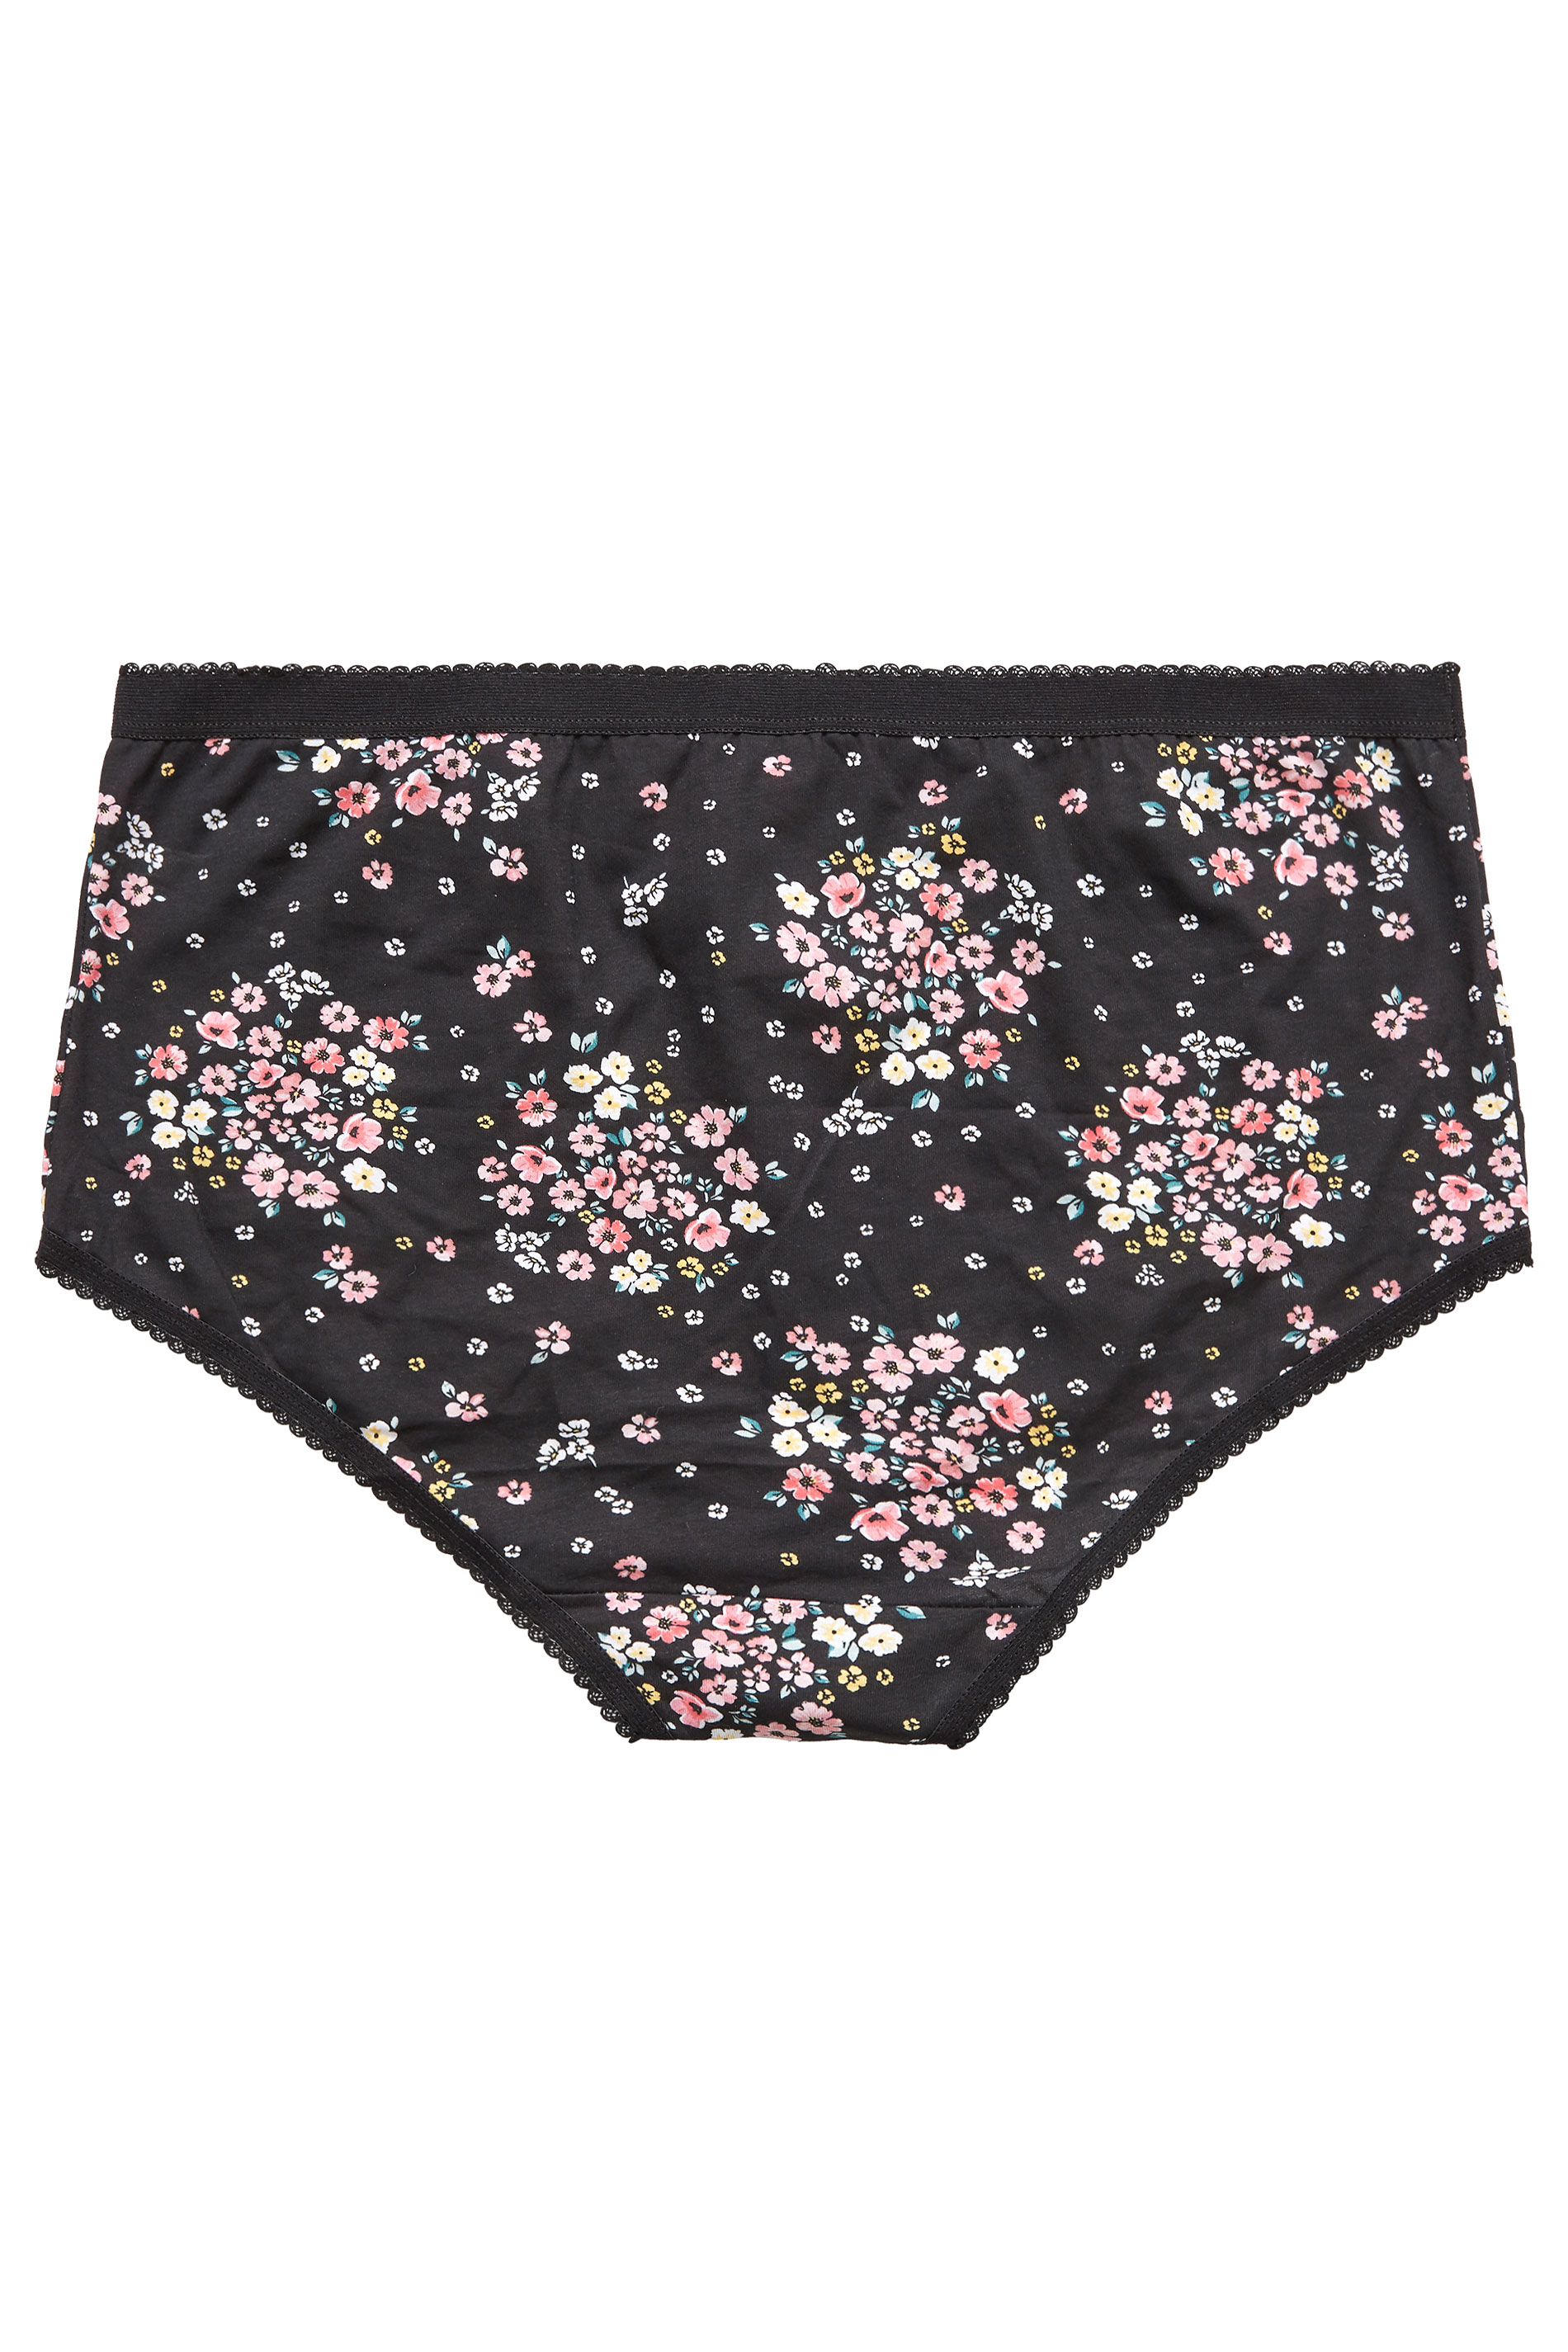 5 PACK Pink & Black Ditsy Floral Print Full Briefs | Yours Clothing